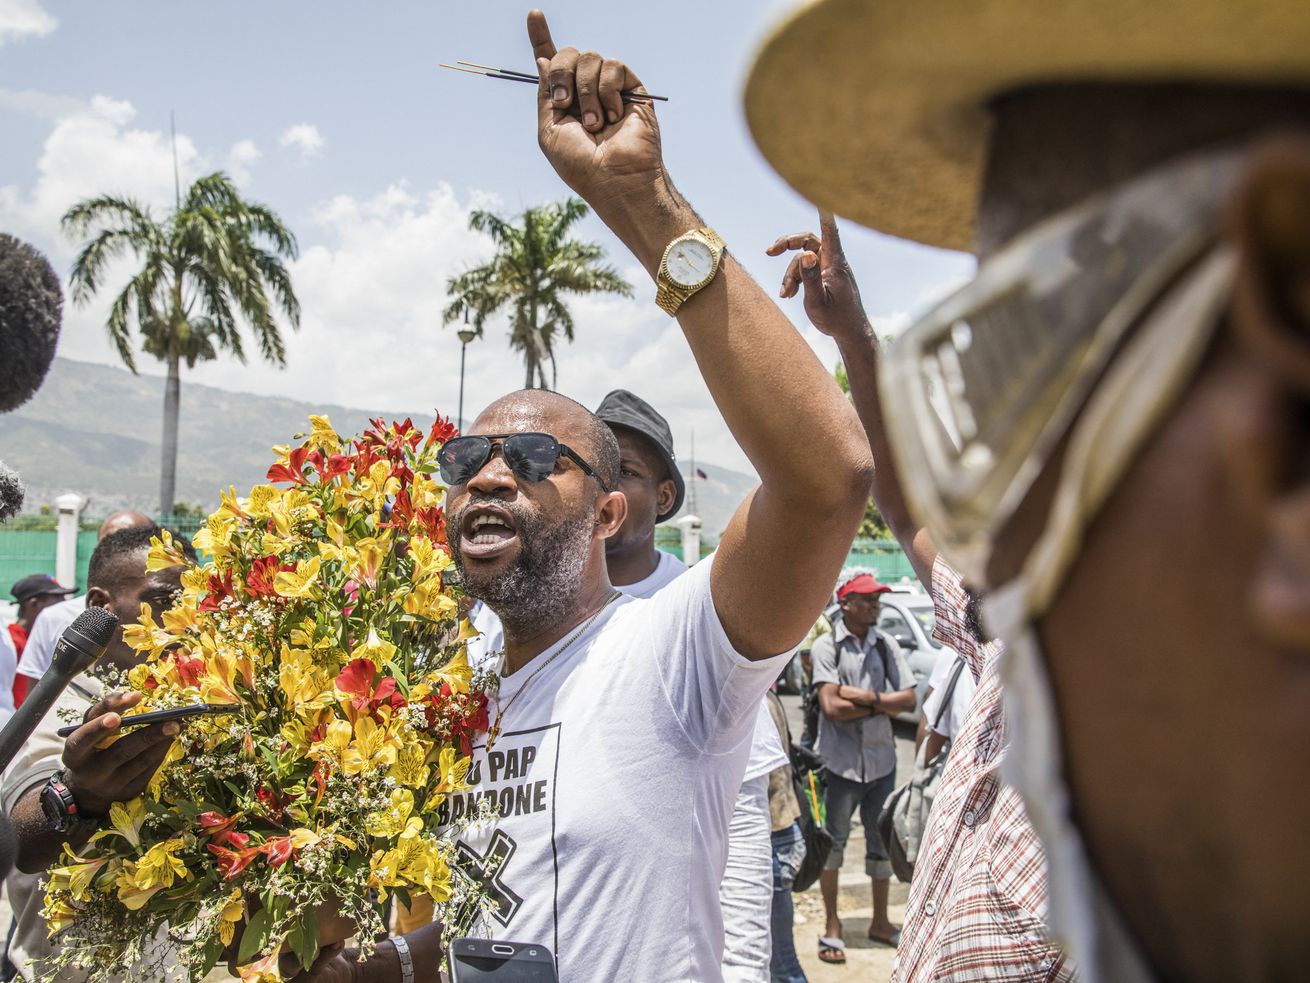 The US is bracing for a potential Haitian migrant crisis. Biden needs to step up.